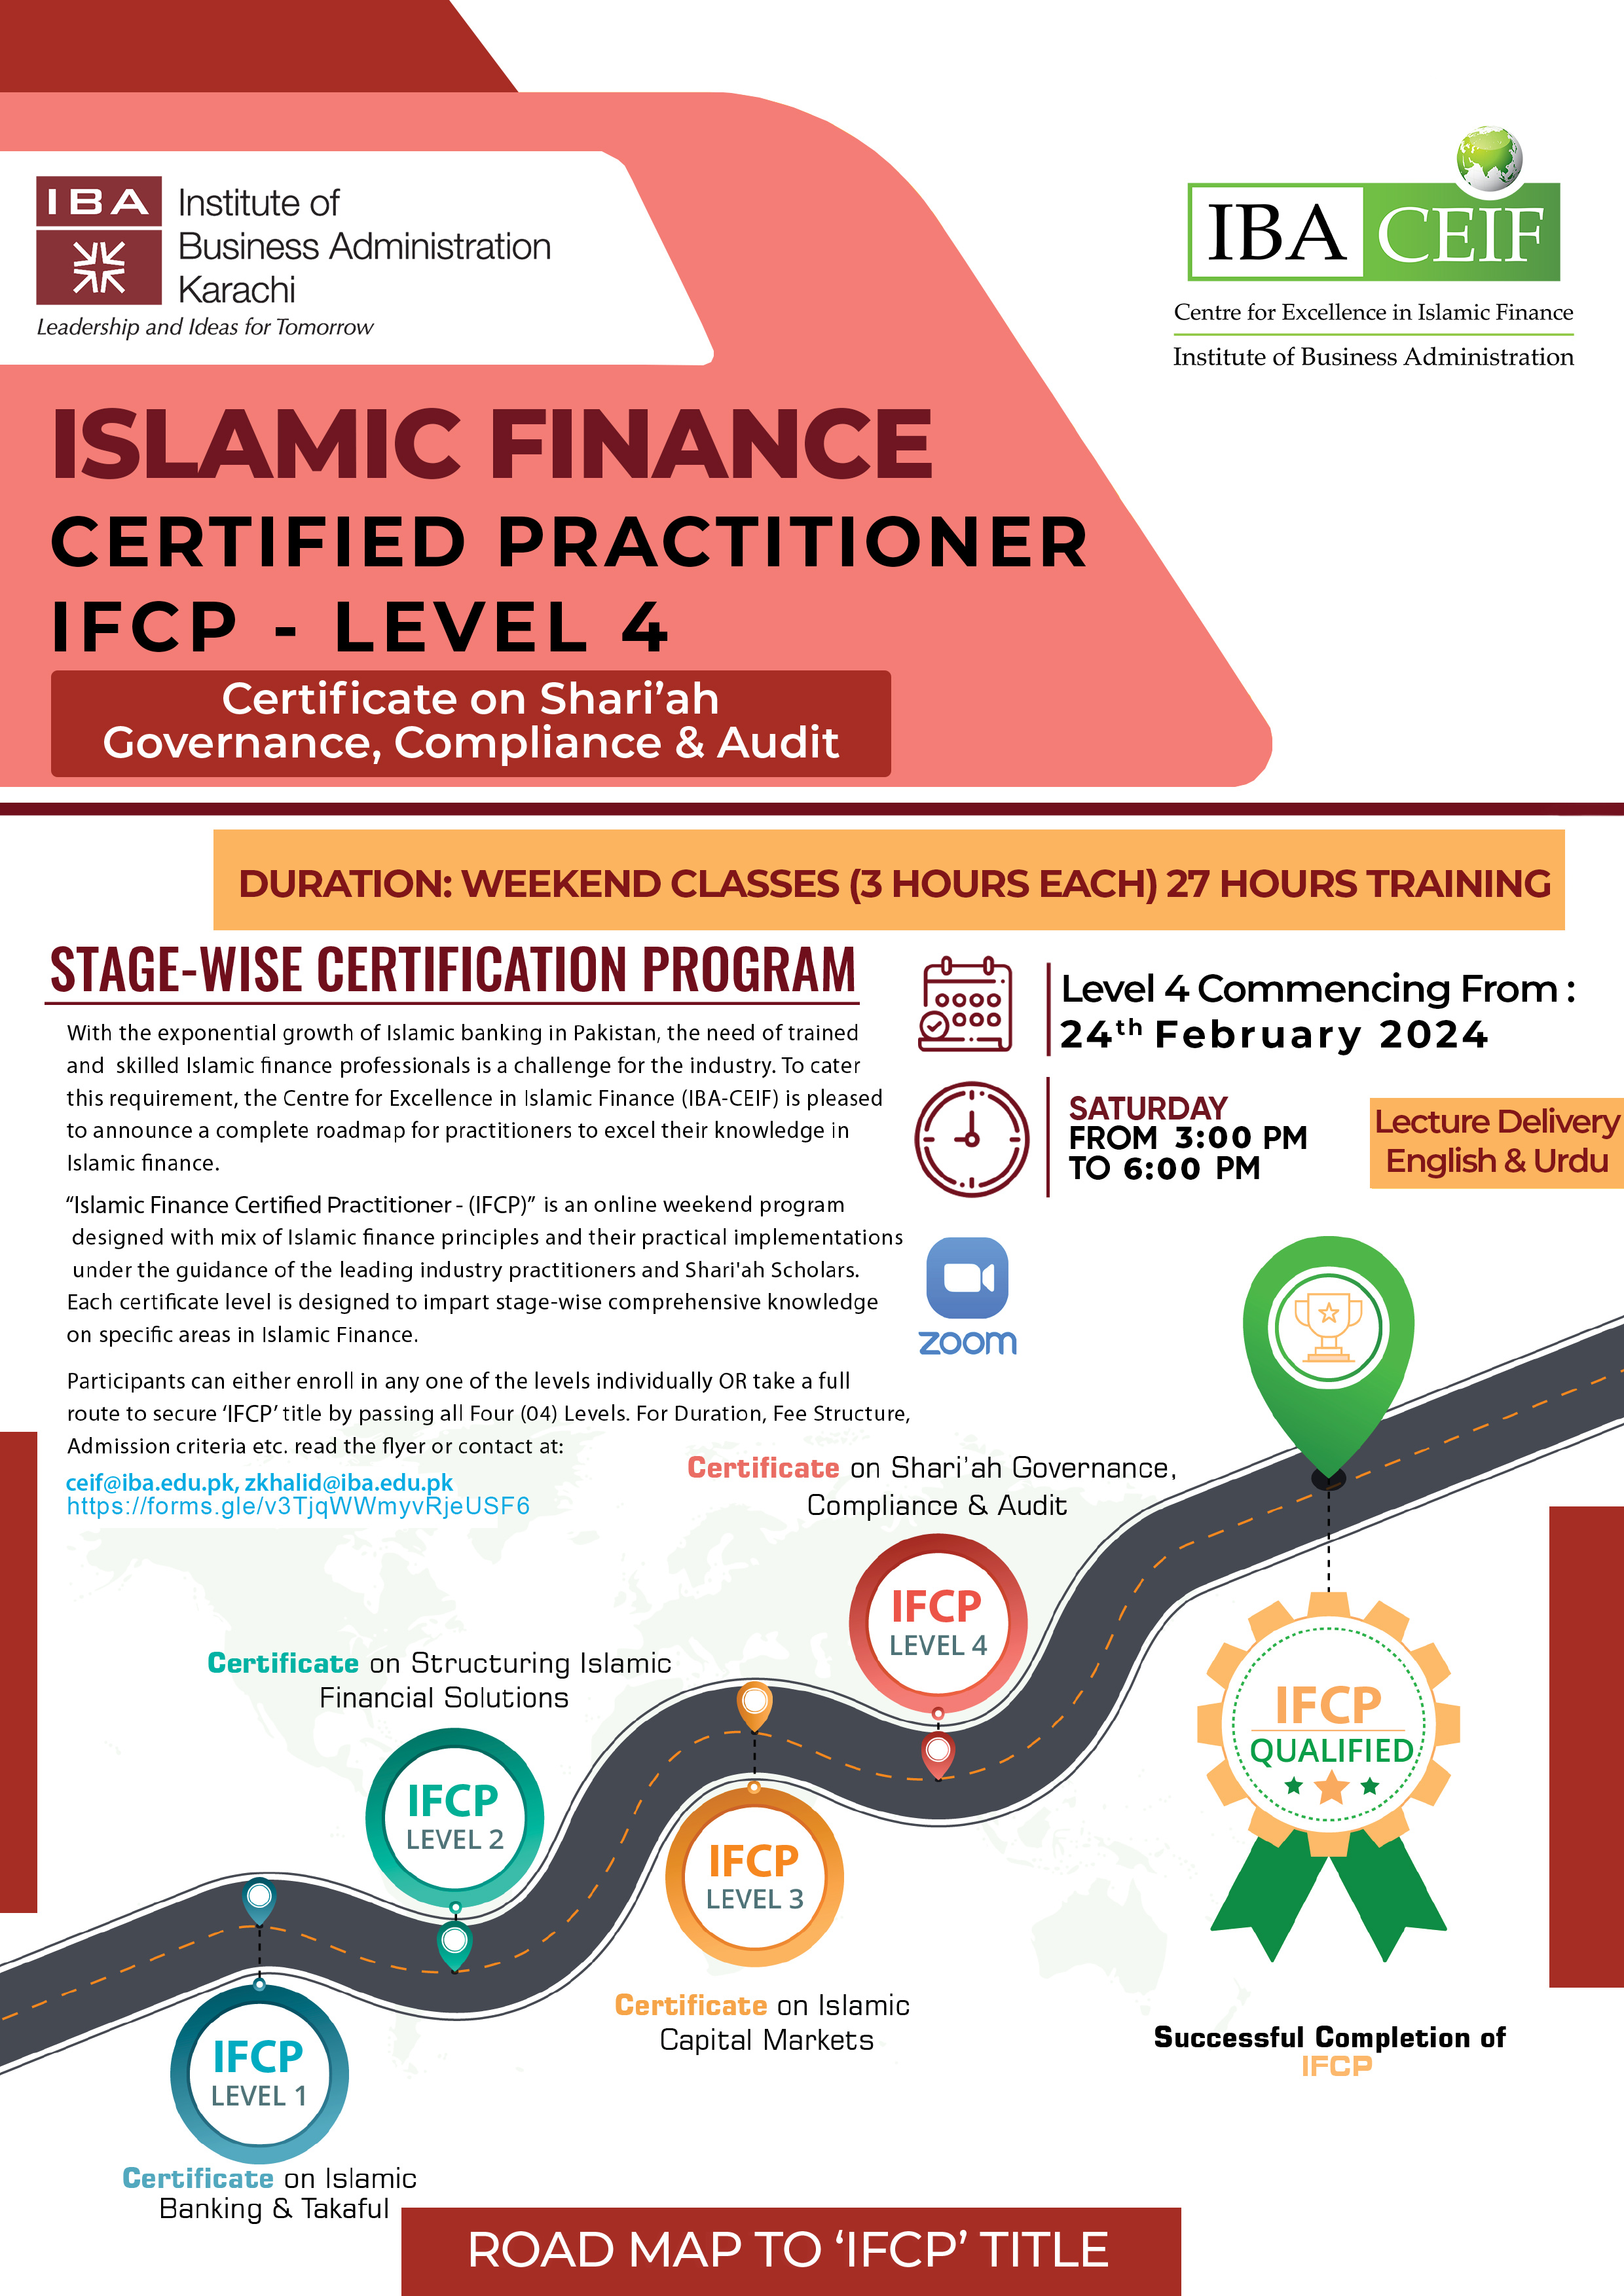 Islamic Finance Certified Practitioners (IFCP) Level 4